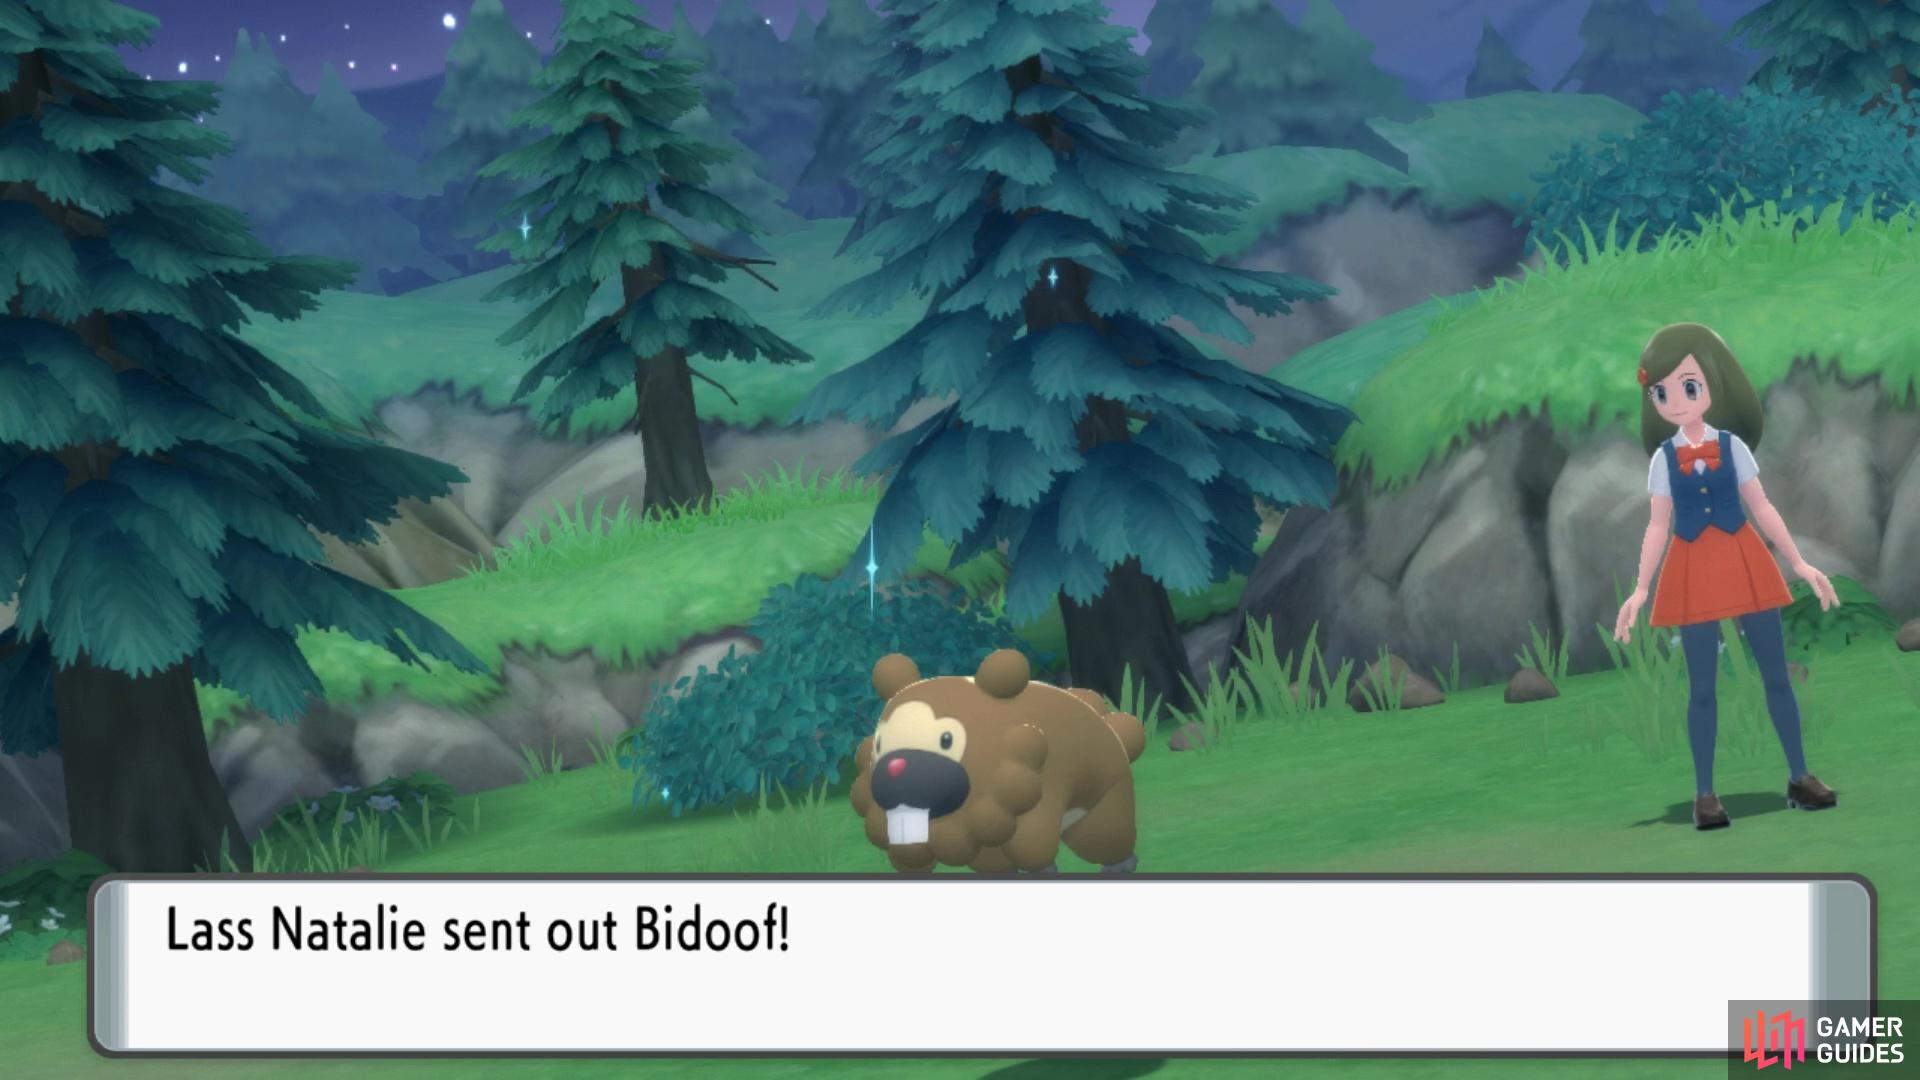 Lass Natalie sends out two separate Bidoof!